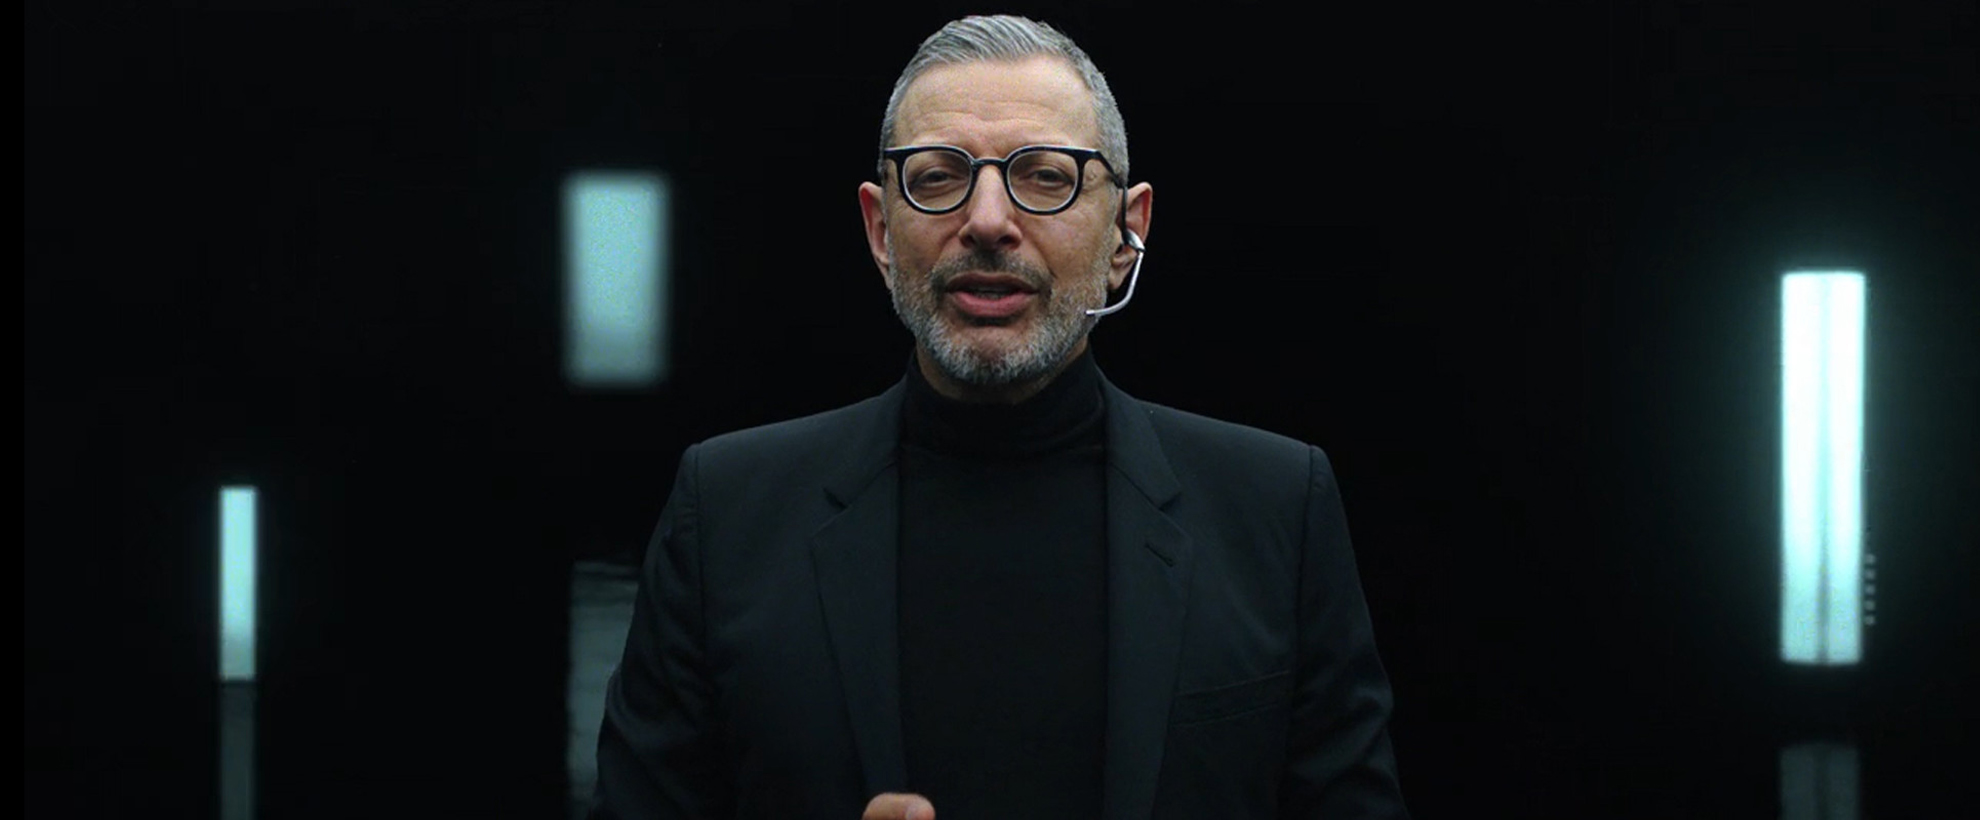 Actor Jeff Goldblum stands in a dark room. He is wearing a black blazer, black turtleneck and black thick framed glasses. He is also wearing a head piece